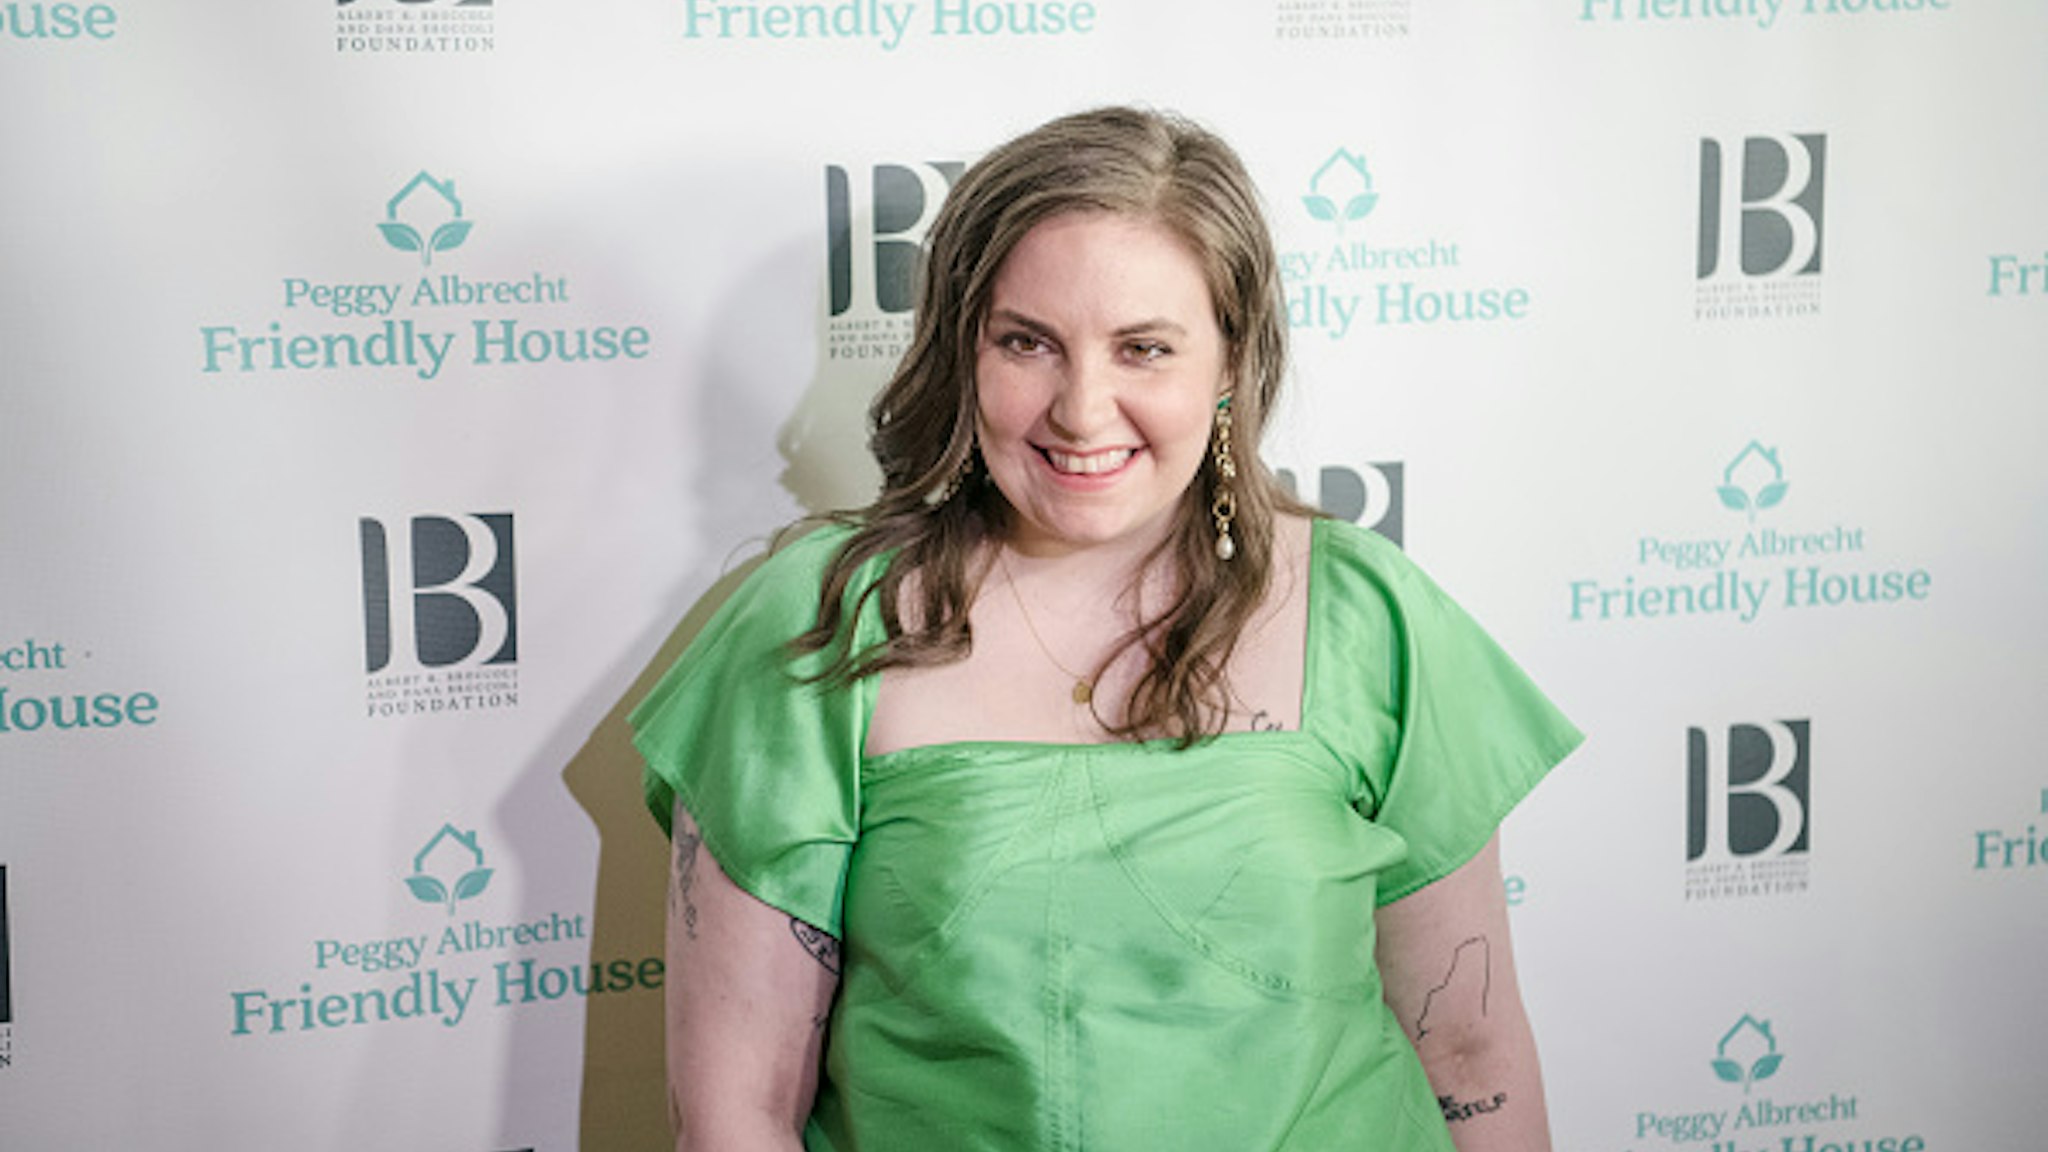 BEVERLY HILLS, CALIFORNIA - OCTOBER 26: Lena Dunham arrives at the Friendly House 30th Annual Awards Luncheon at The Beverly Hilton Hotel on October 26, 2019 in Beverly Hills, California.